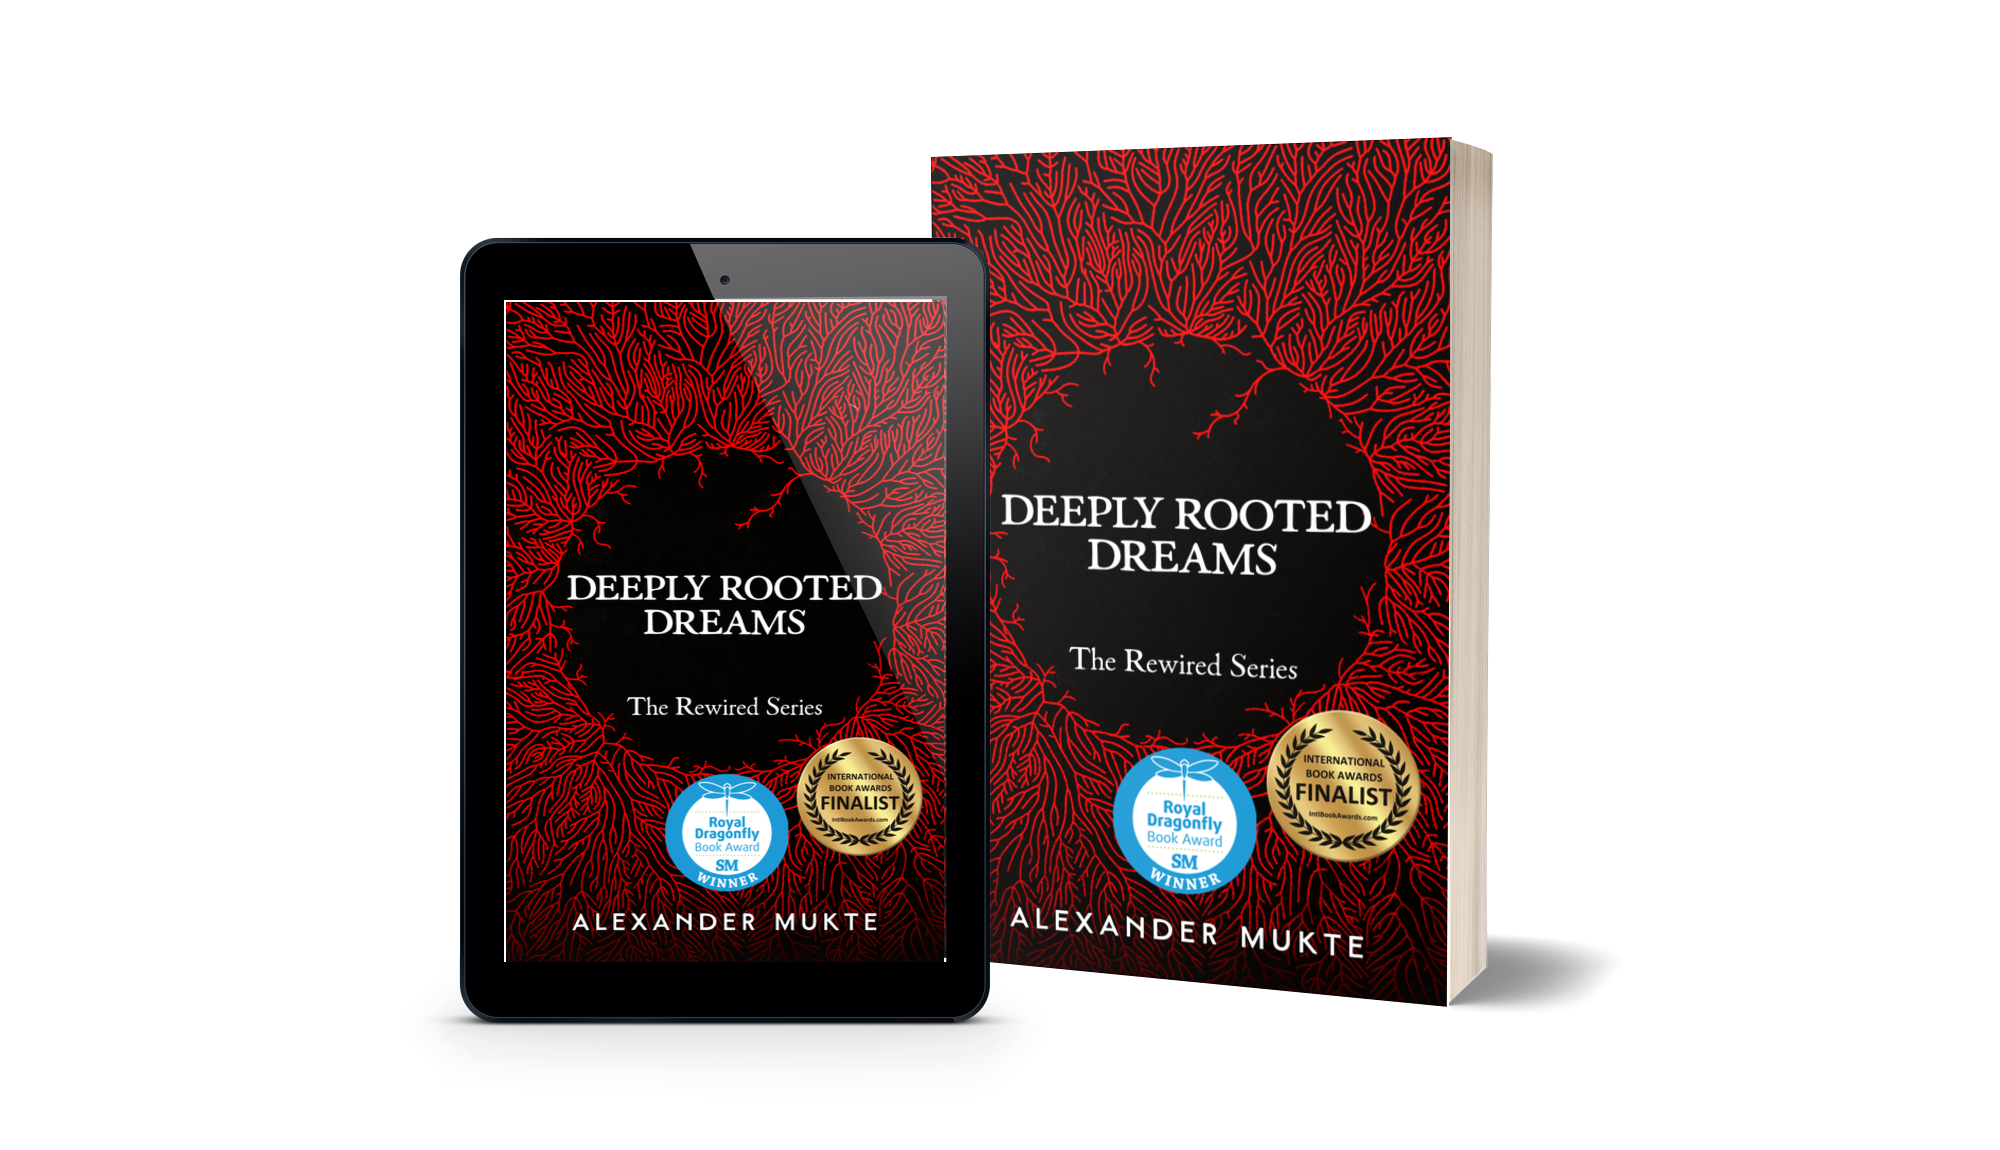 Deeply Rooted Dreams Composite Mockup v2.png